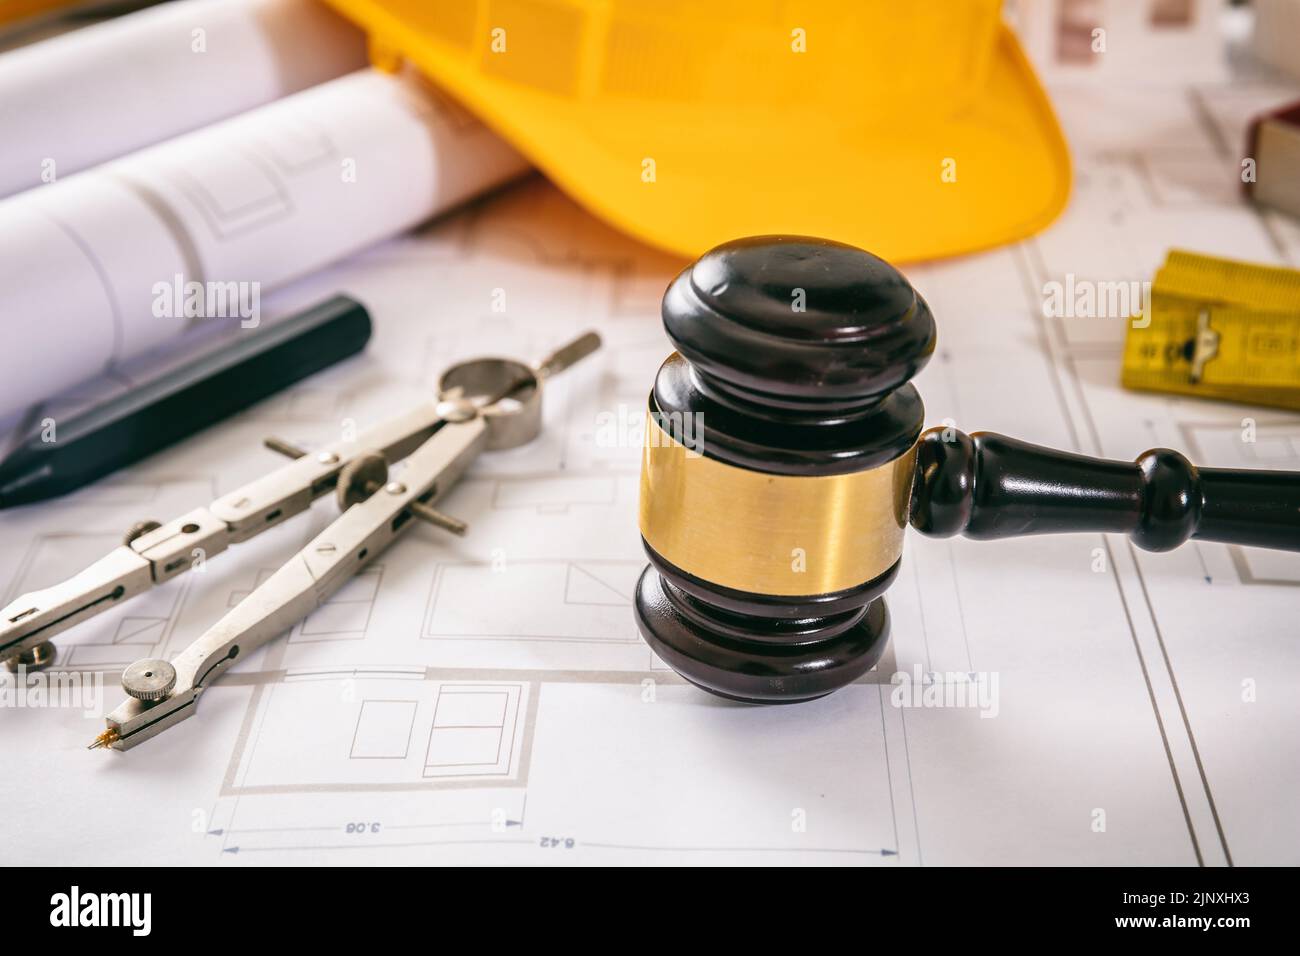 Construction and Labor law. Yellow safety helmet and judge gavel on building blueprint plans, close up view. Stock Photo